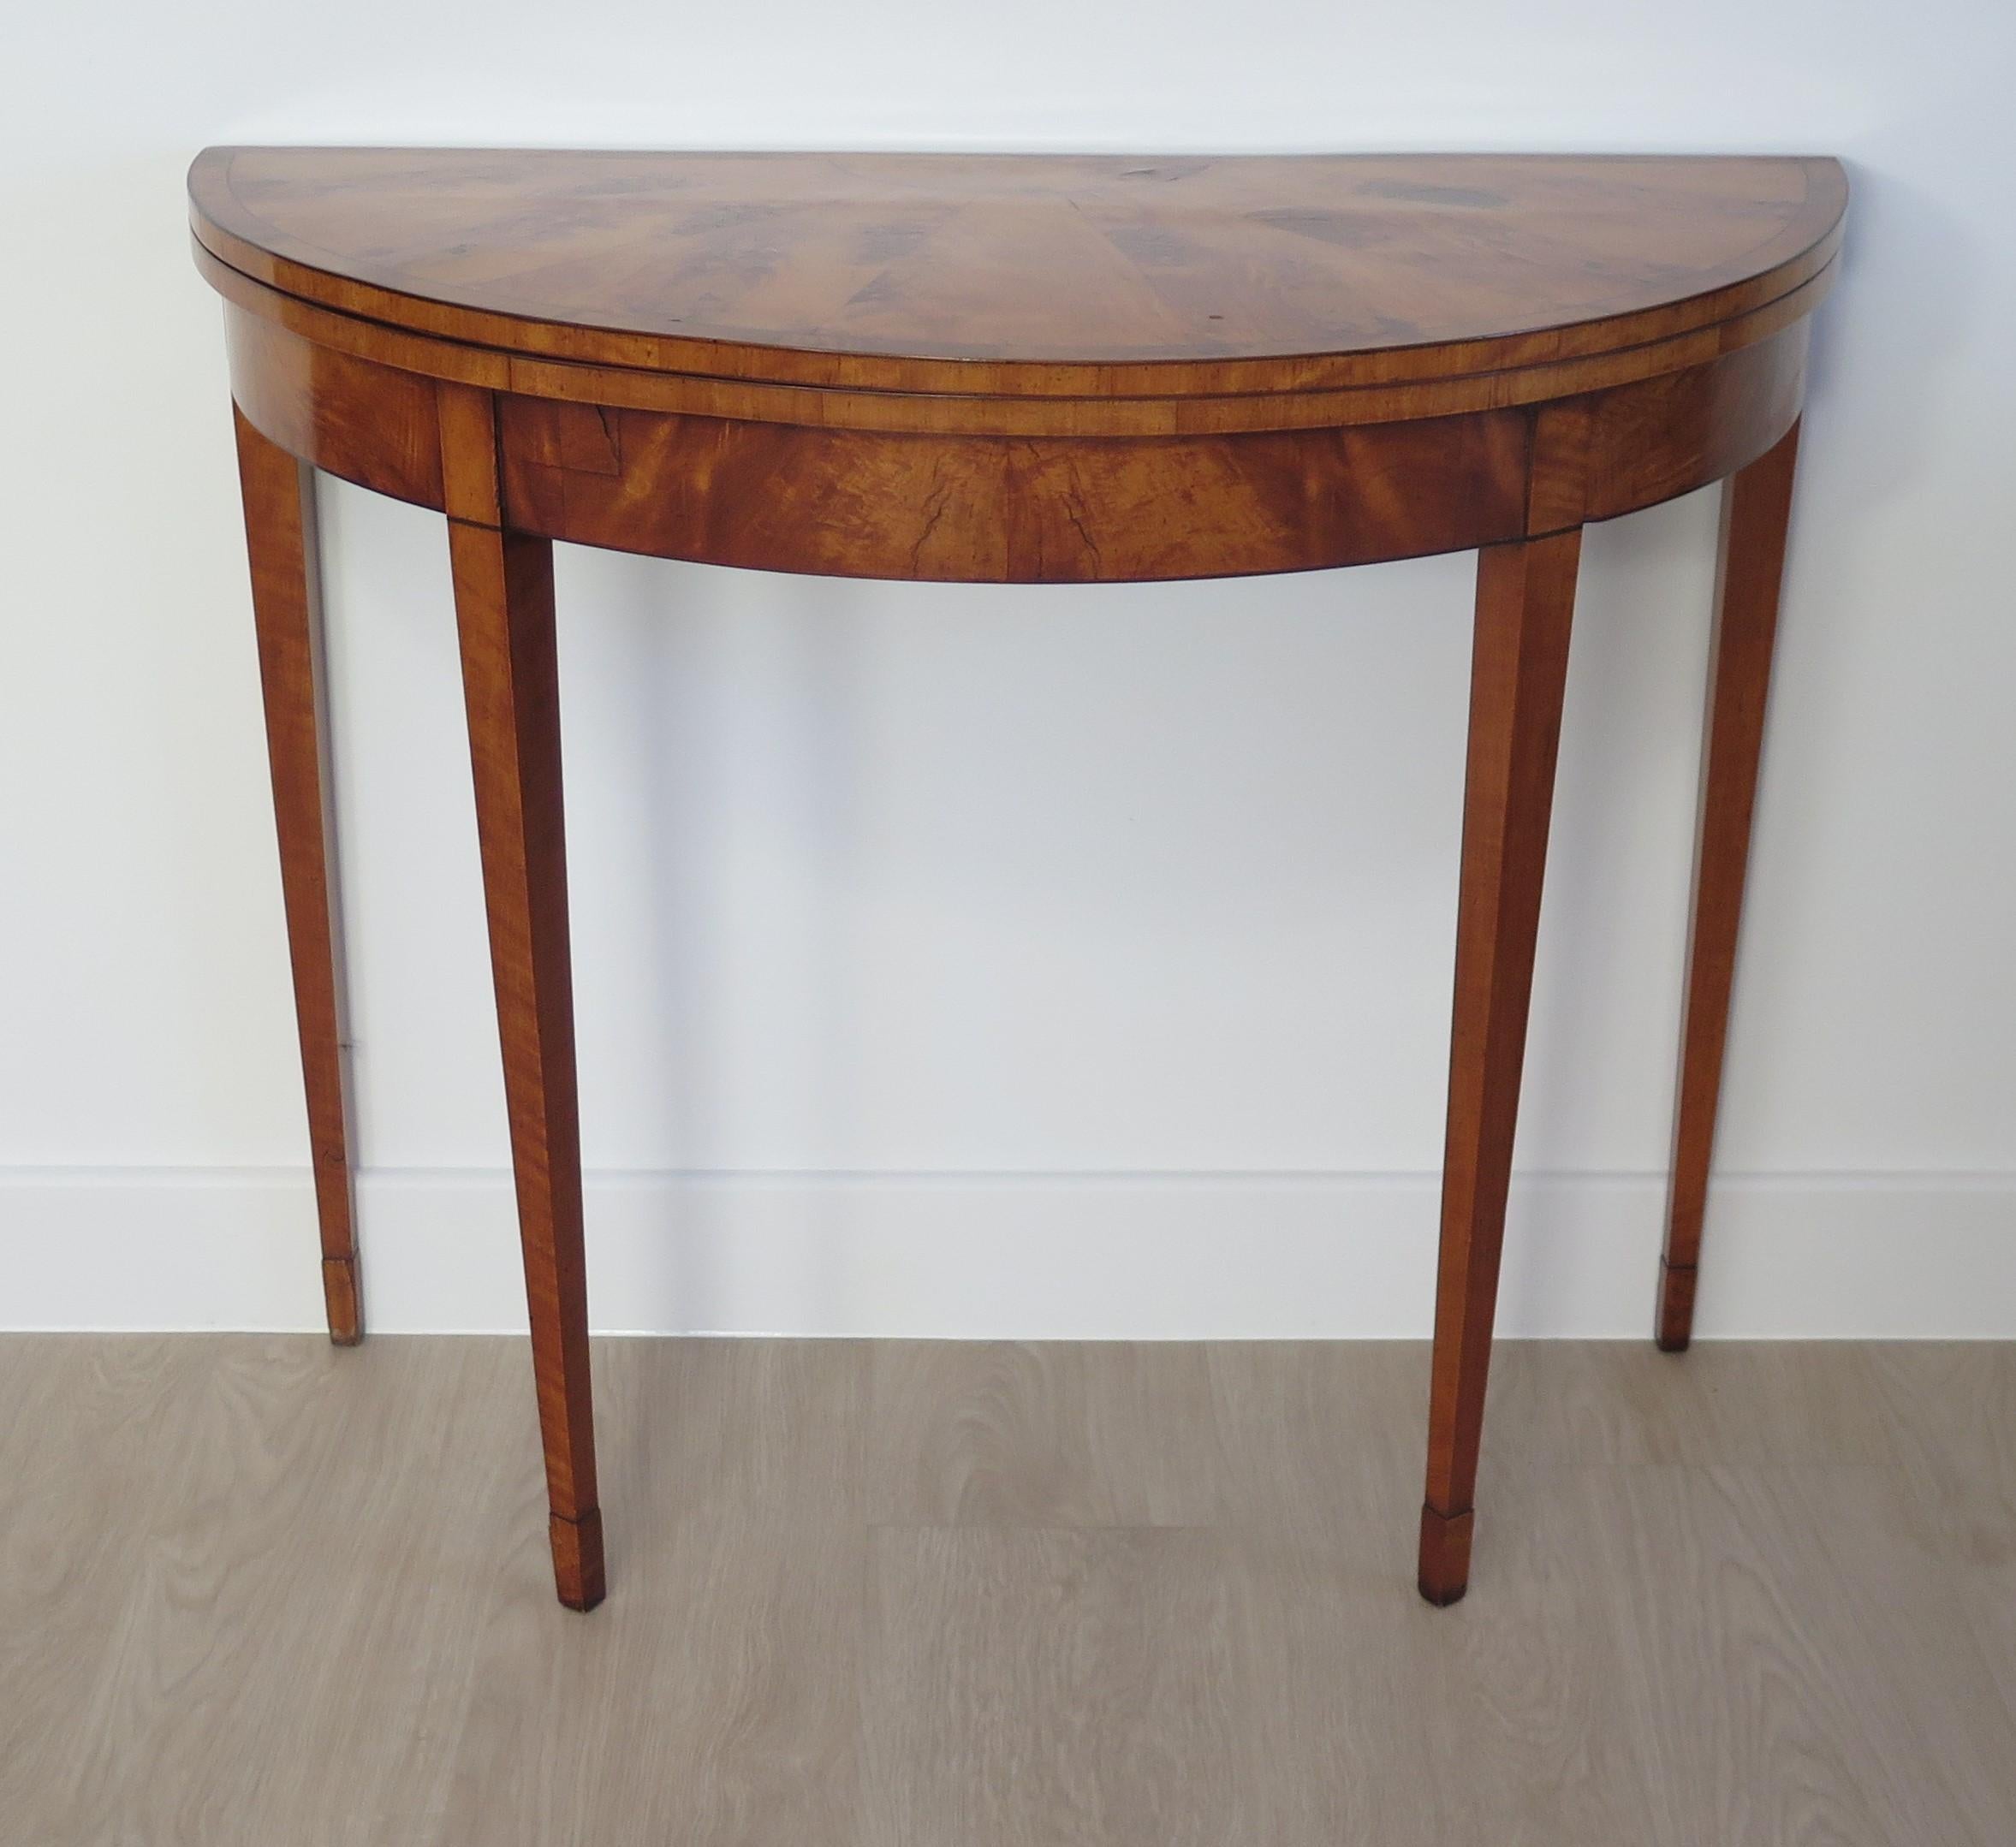 A very beautiful and elegant Georgian Sheraton Period, fold over Demi-Lune card or games table in Satinwood, Circa 1790. 

This is a semi circular (demi-lune) fold over table made of Satinwood and carefully chosen Satinwood veneers, with Kingwood